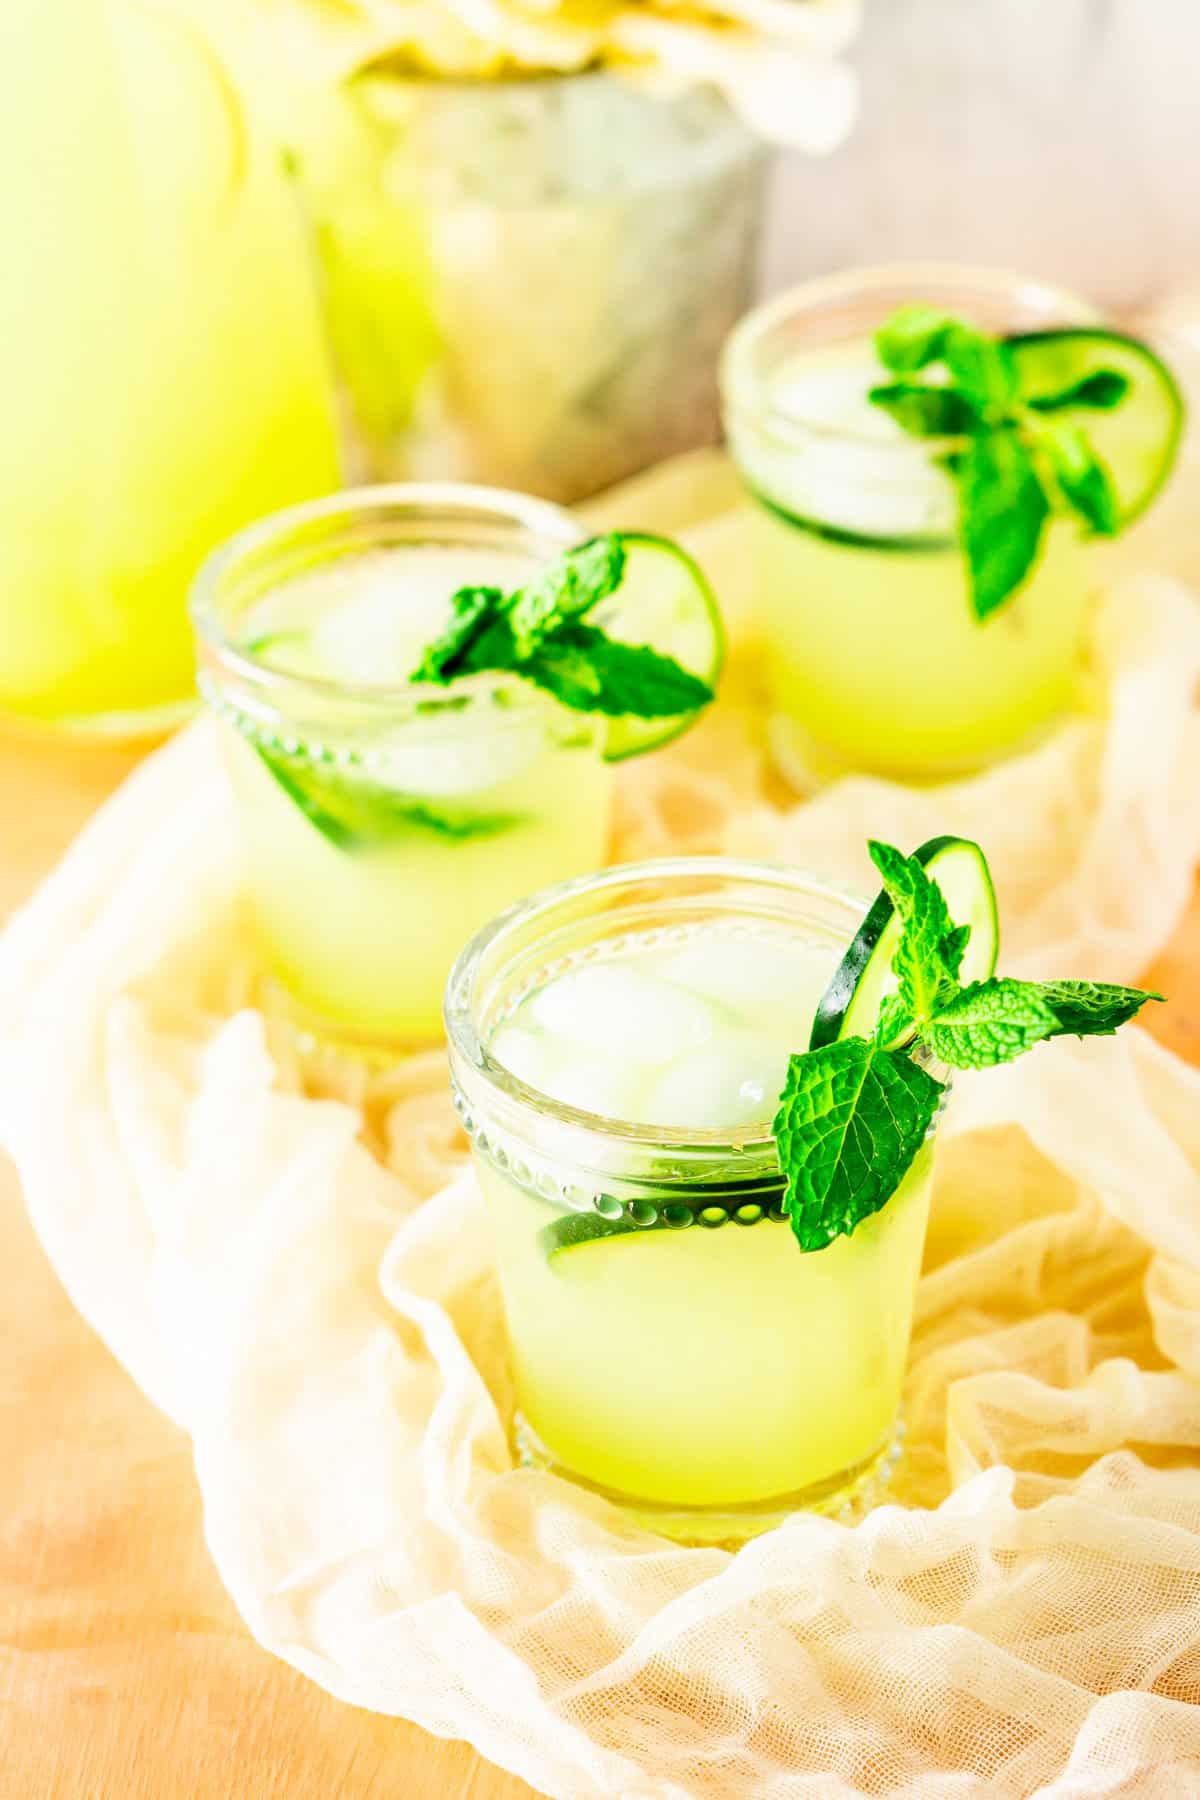 Looking down into three glasses of mint-cucumber lemonade.